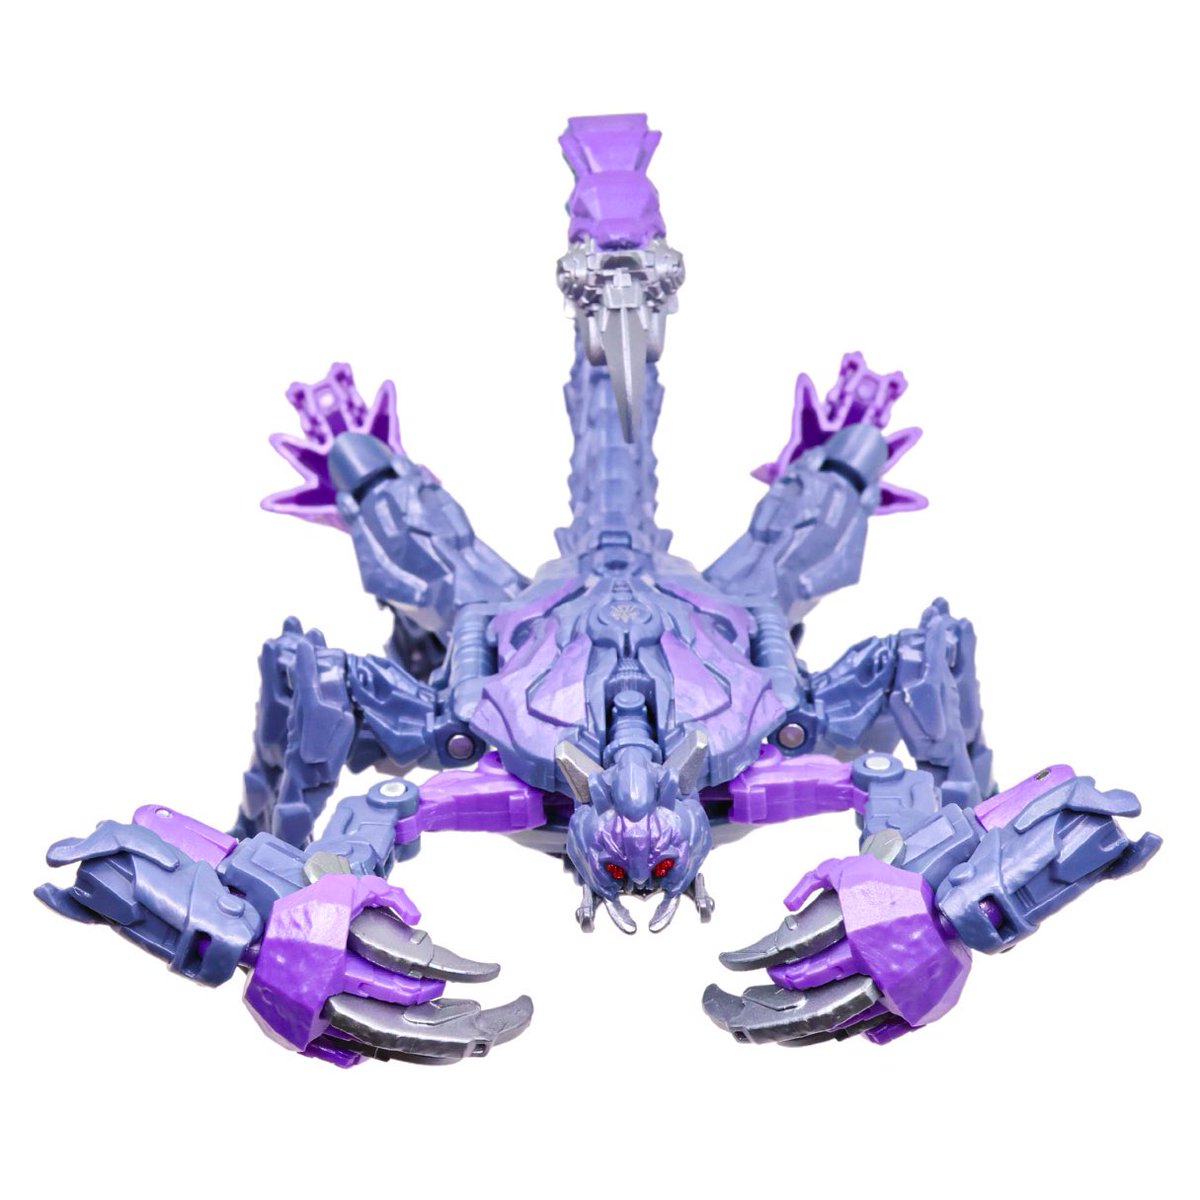 Truly a face only a Predacon Mom could love! 

Are you going to be picking up Studio Series Scorponok?

#Transformers #RiseoftheBeasts #StudioSeries